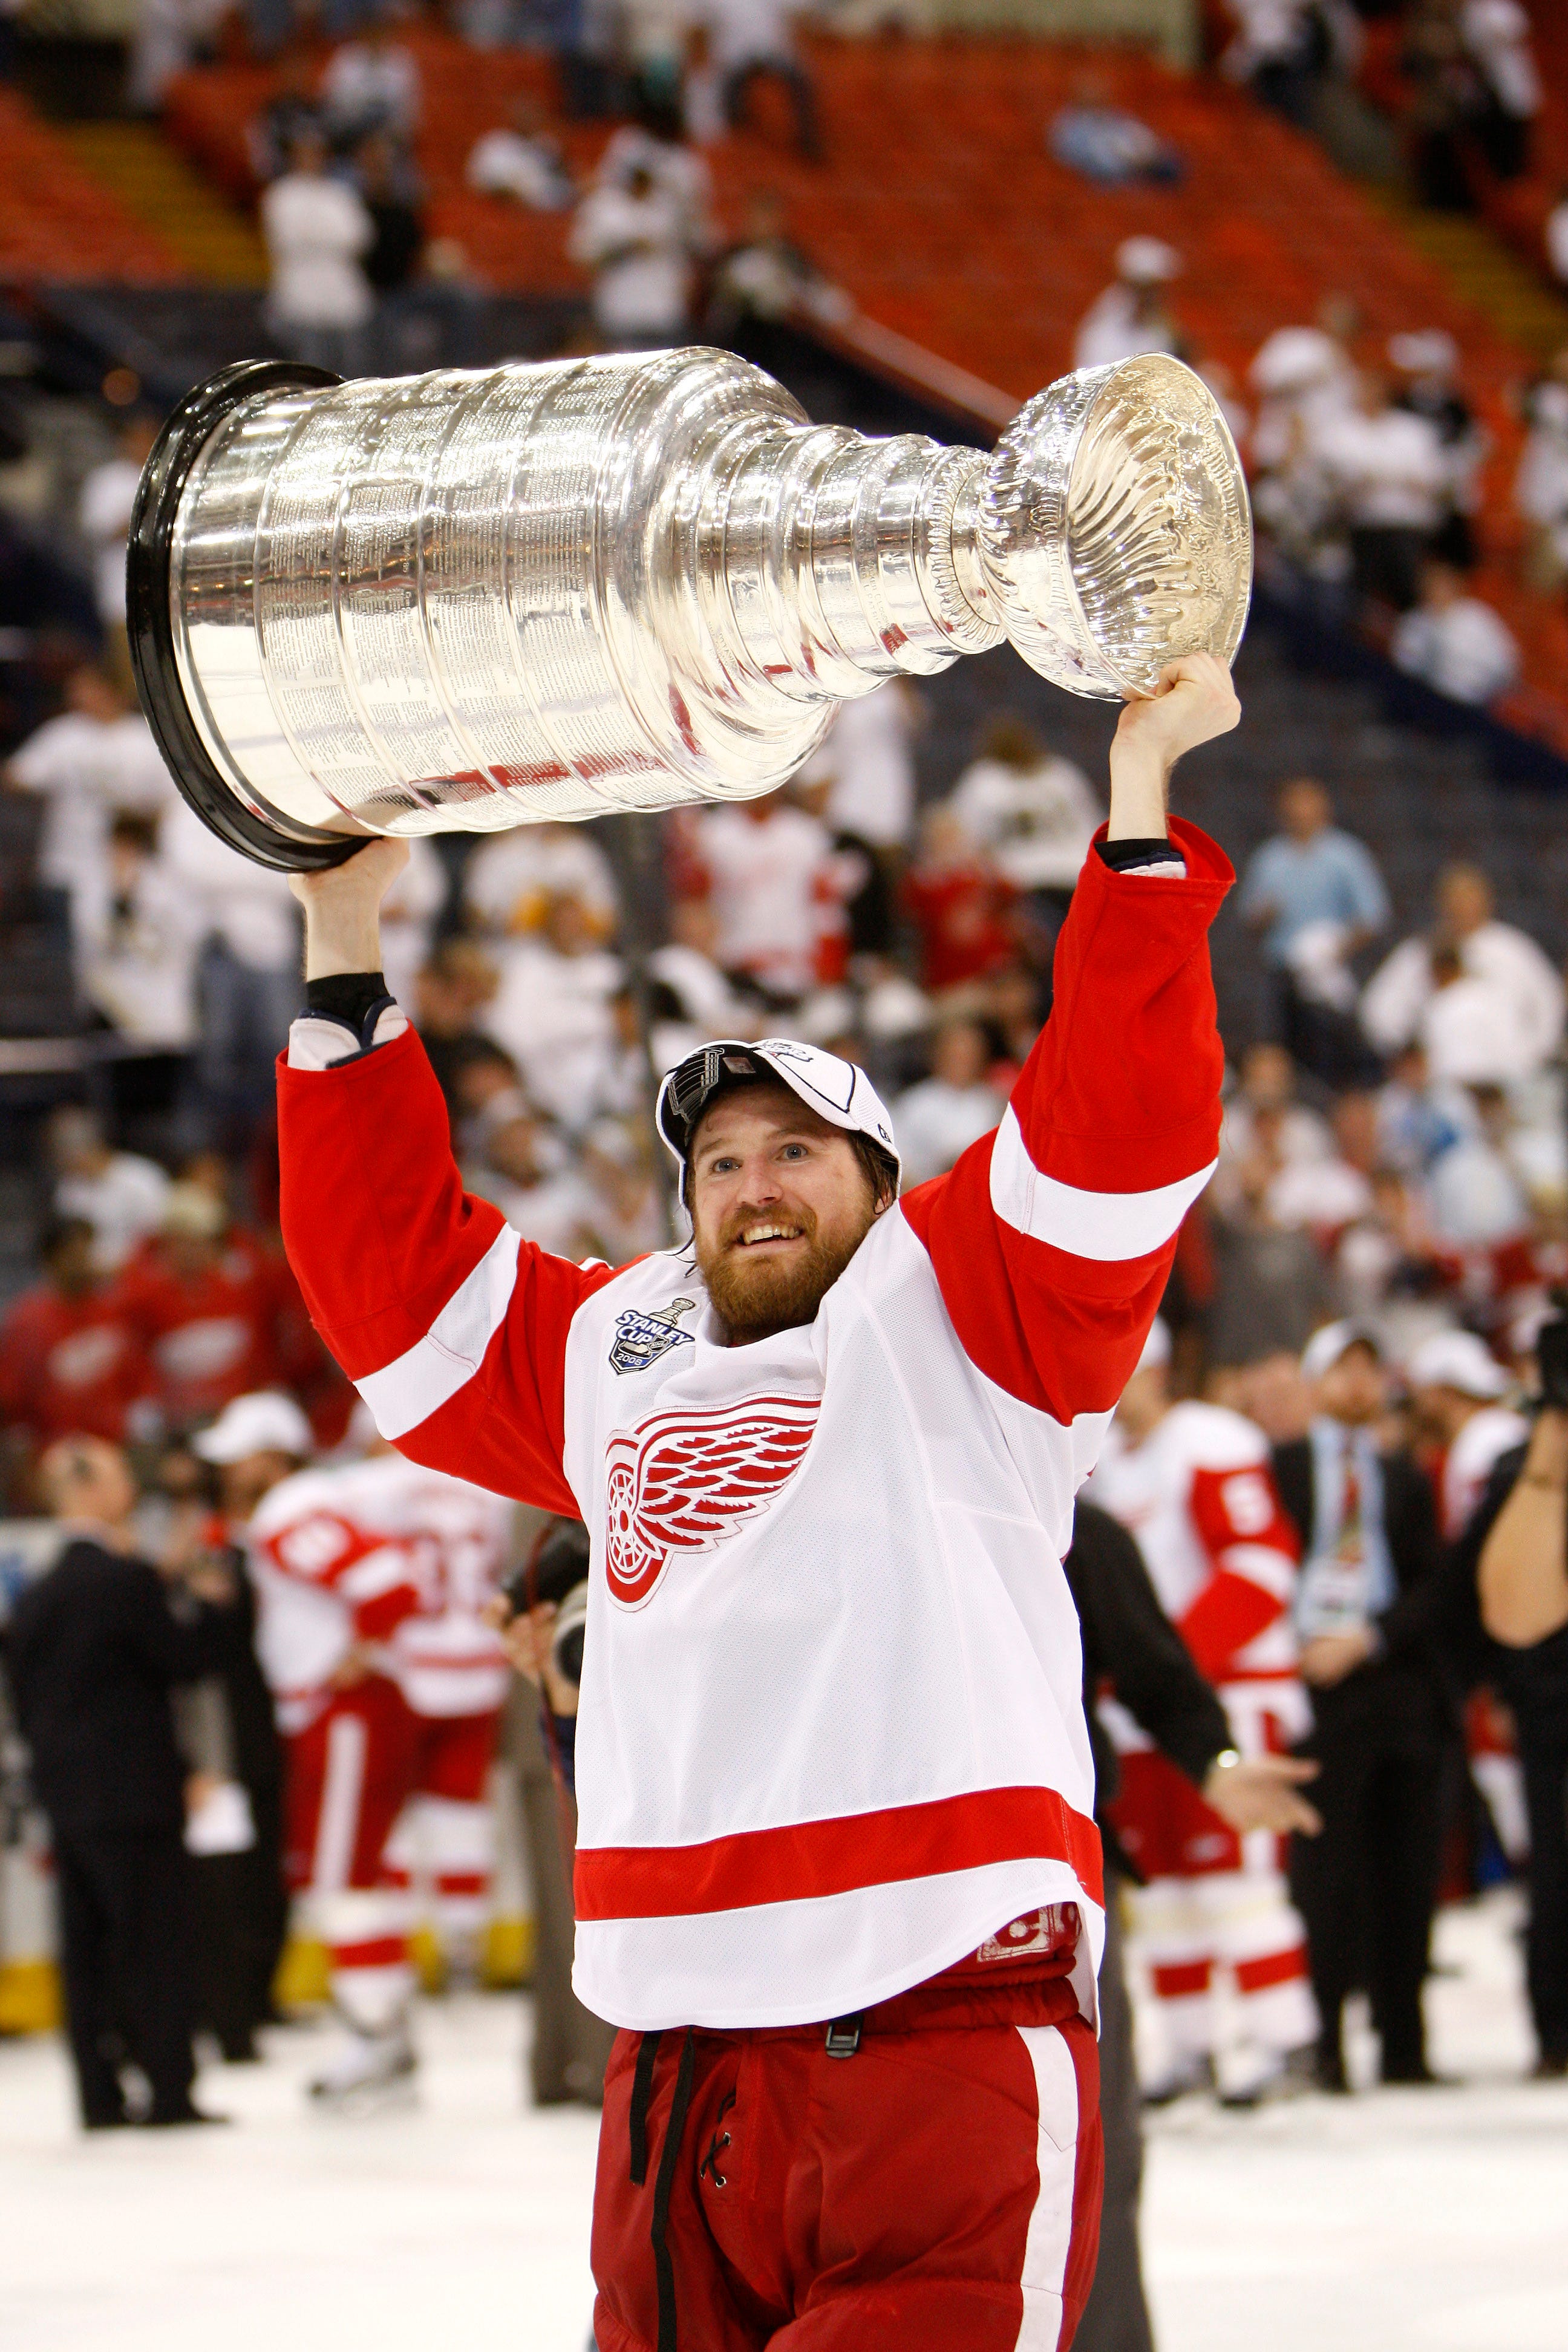 Detroit Red Wings defenseman Niklas Kronwall lifts the cup after the Wings defeated the Penguins in Game 6 of the Stanley Cup Finals at Mellon Arena in Pittsburgh on June 4, 2008.